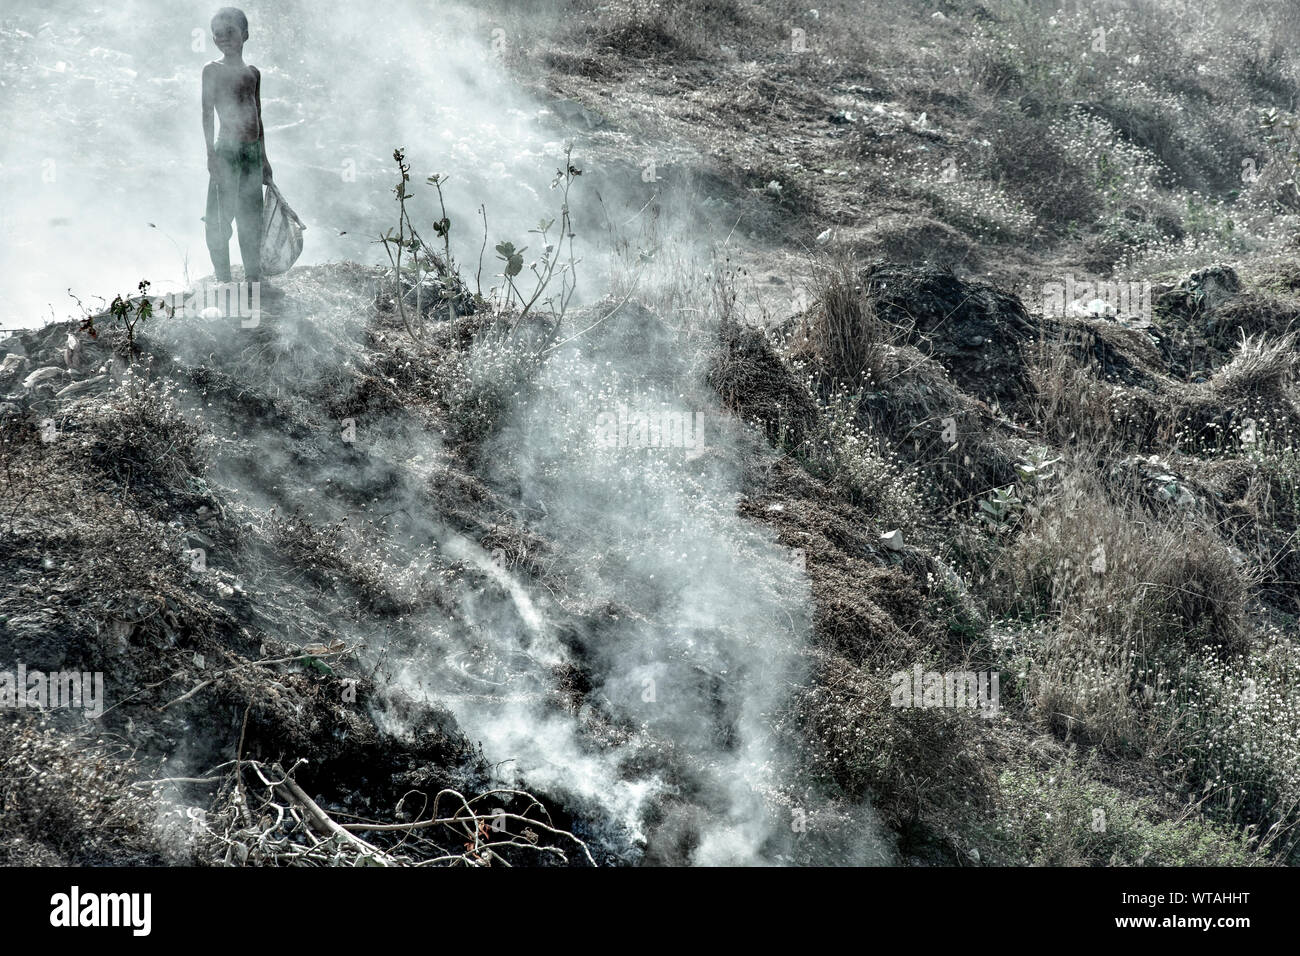 Young boy behind the smoke of the Stung Meanchey landfill Stock Photo